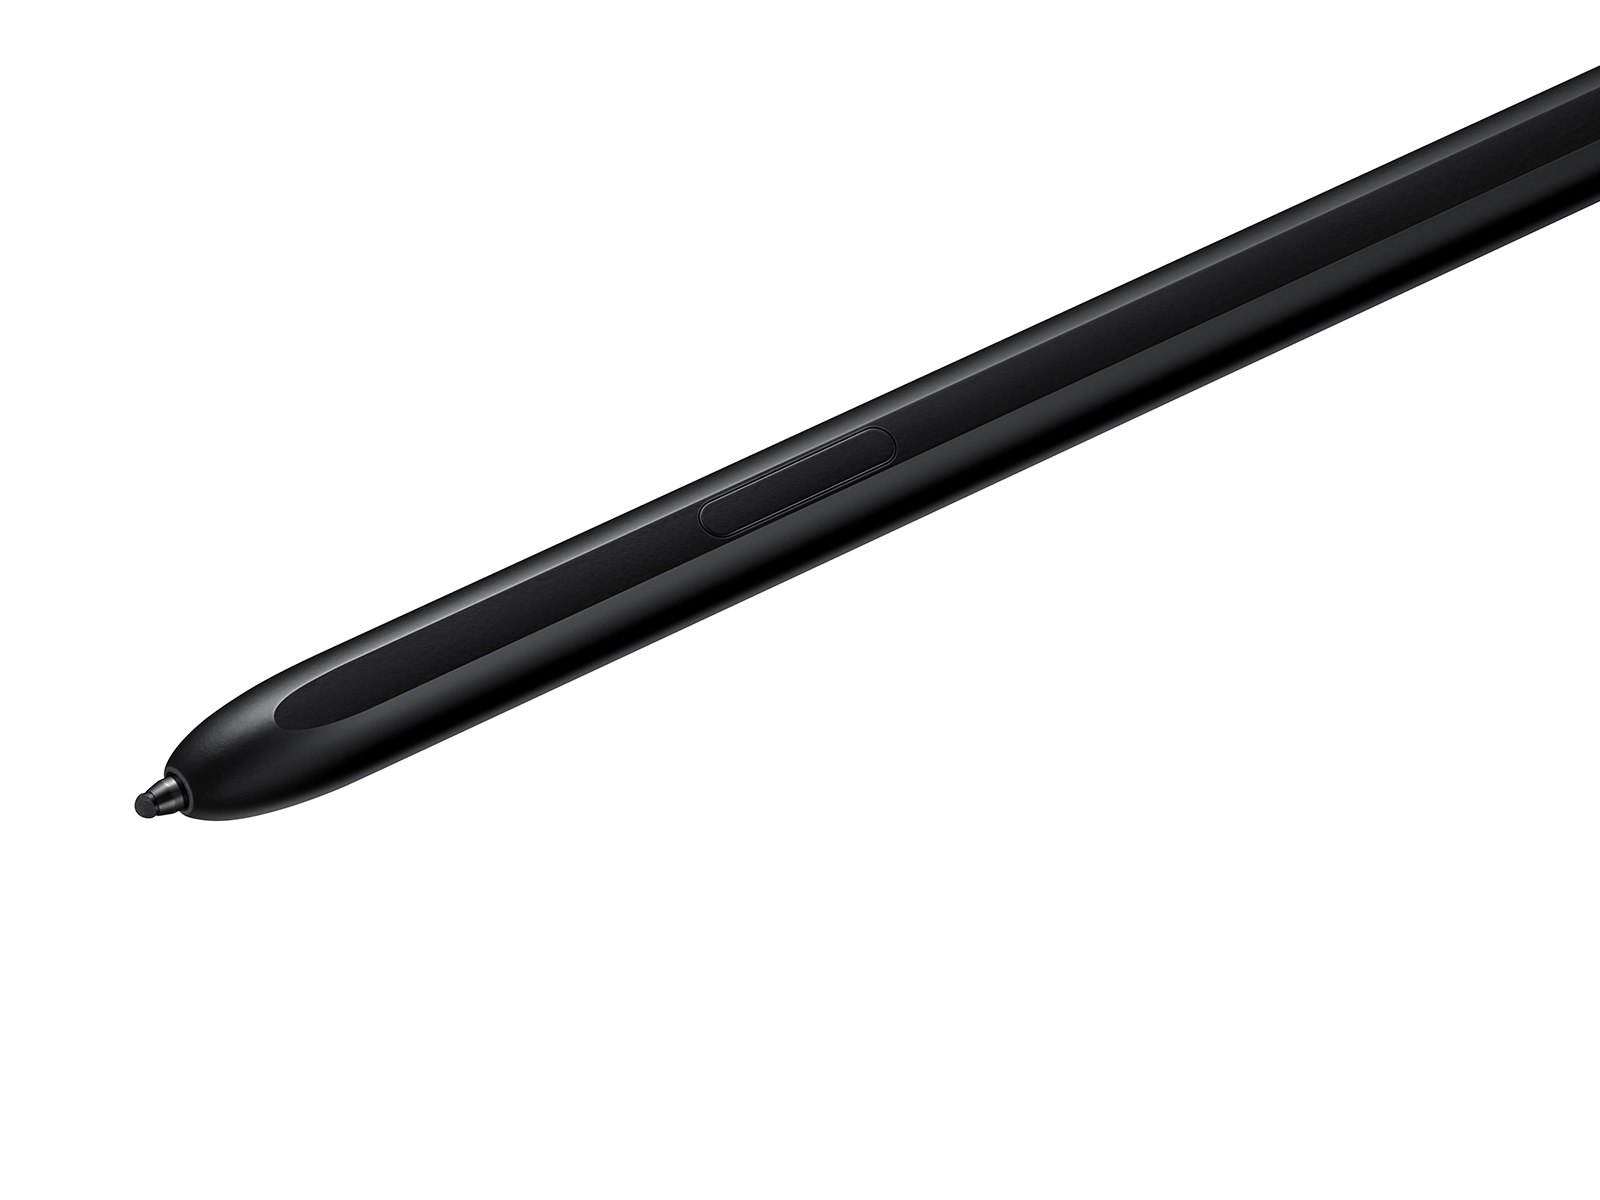 What is an S Pen?